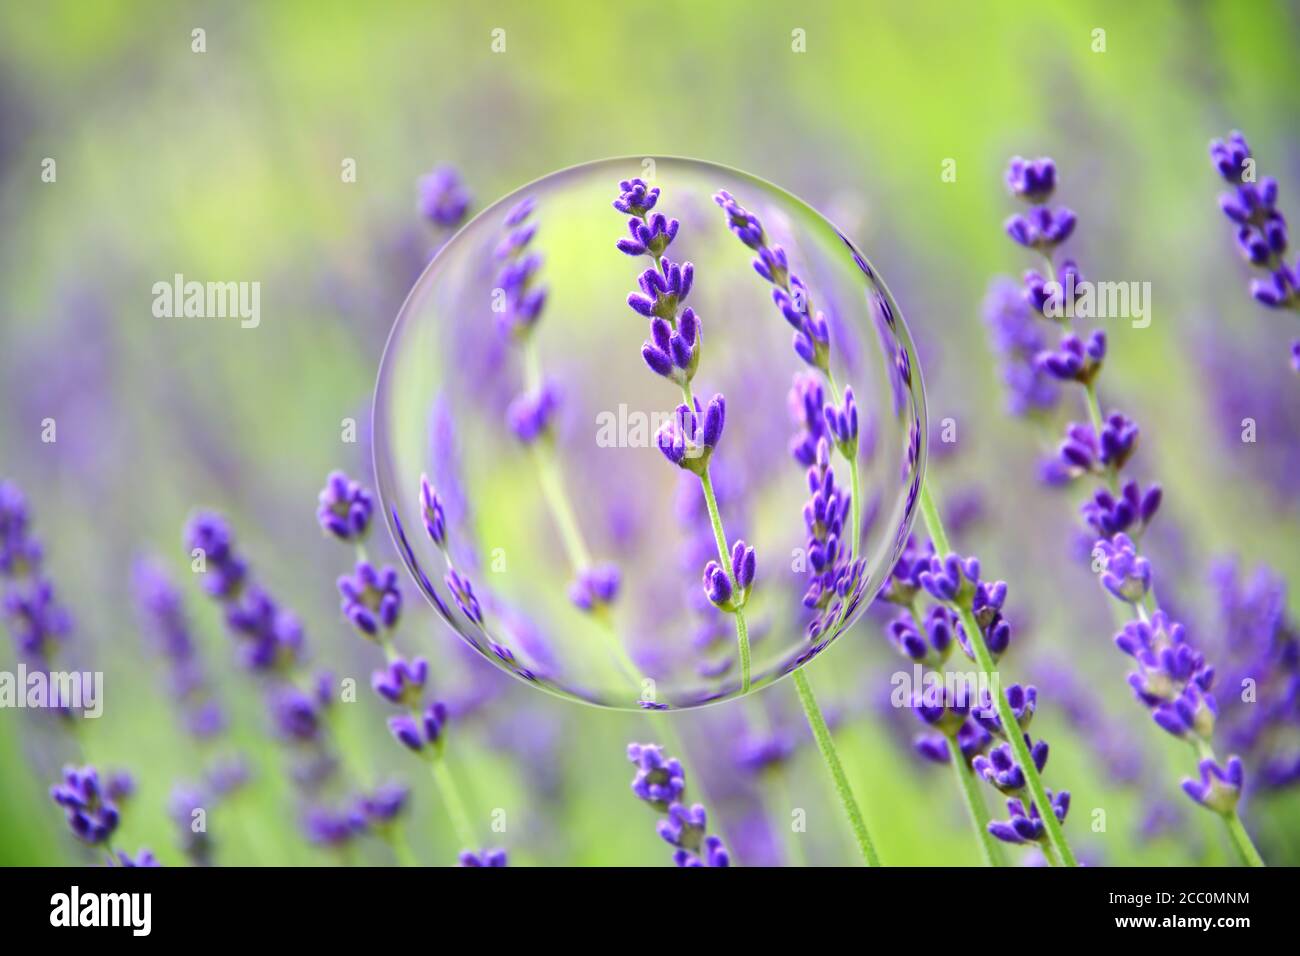 Lavender flower (Lavandula angustifolia, Hidcote) in closeup with soft bokeh background. Artistic crystal ball effect. Stock Photo